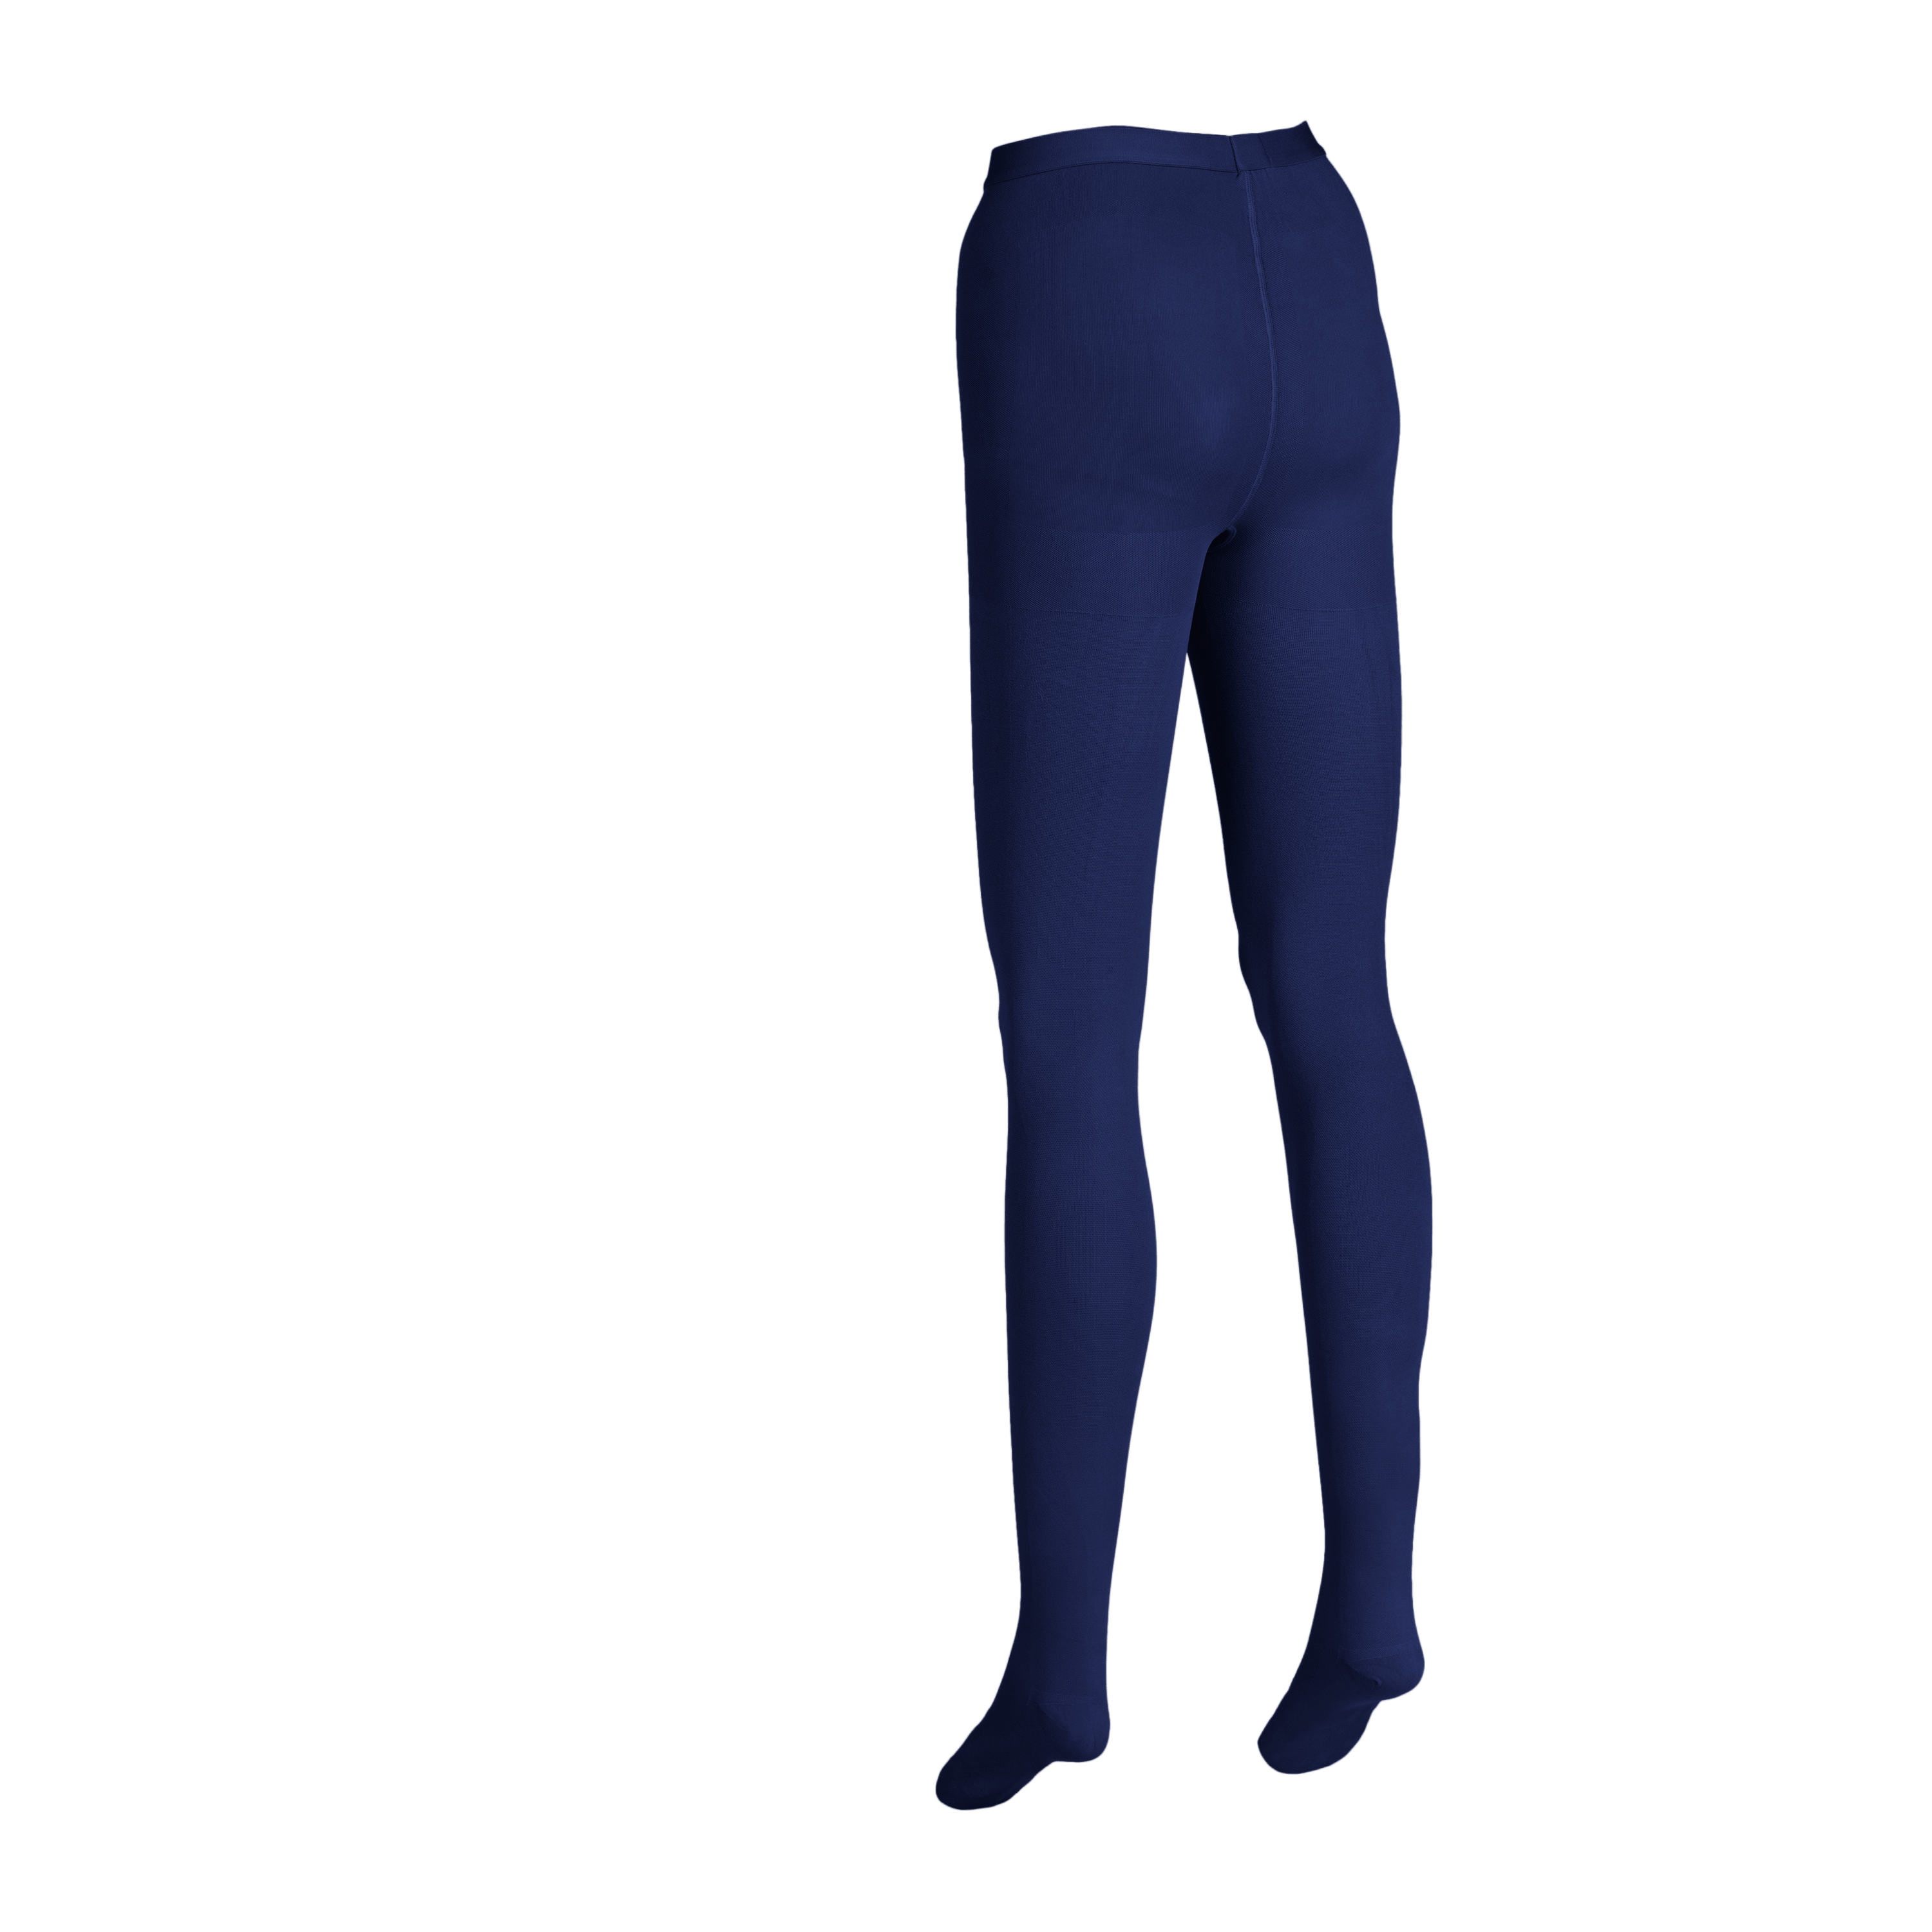 Womens Toeless Compression Tights 20-30mmHg for Circulation